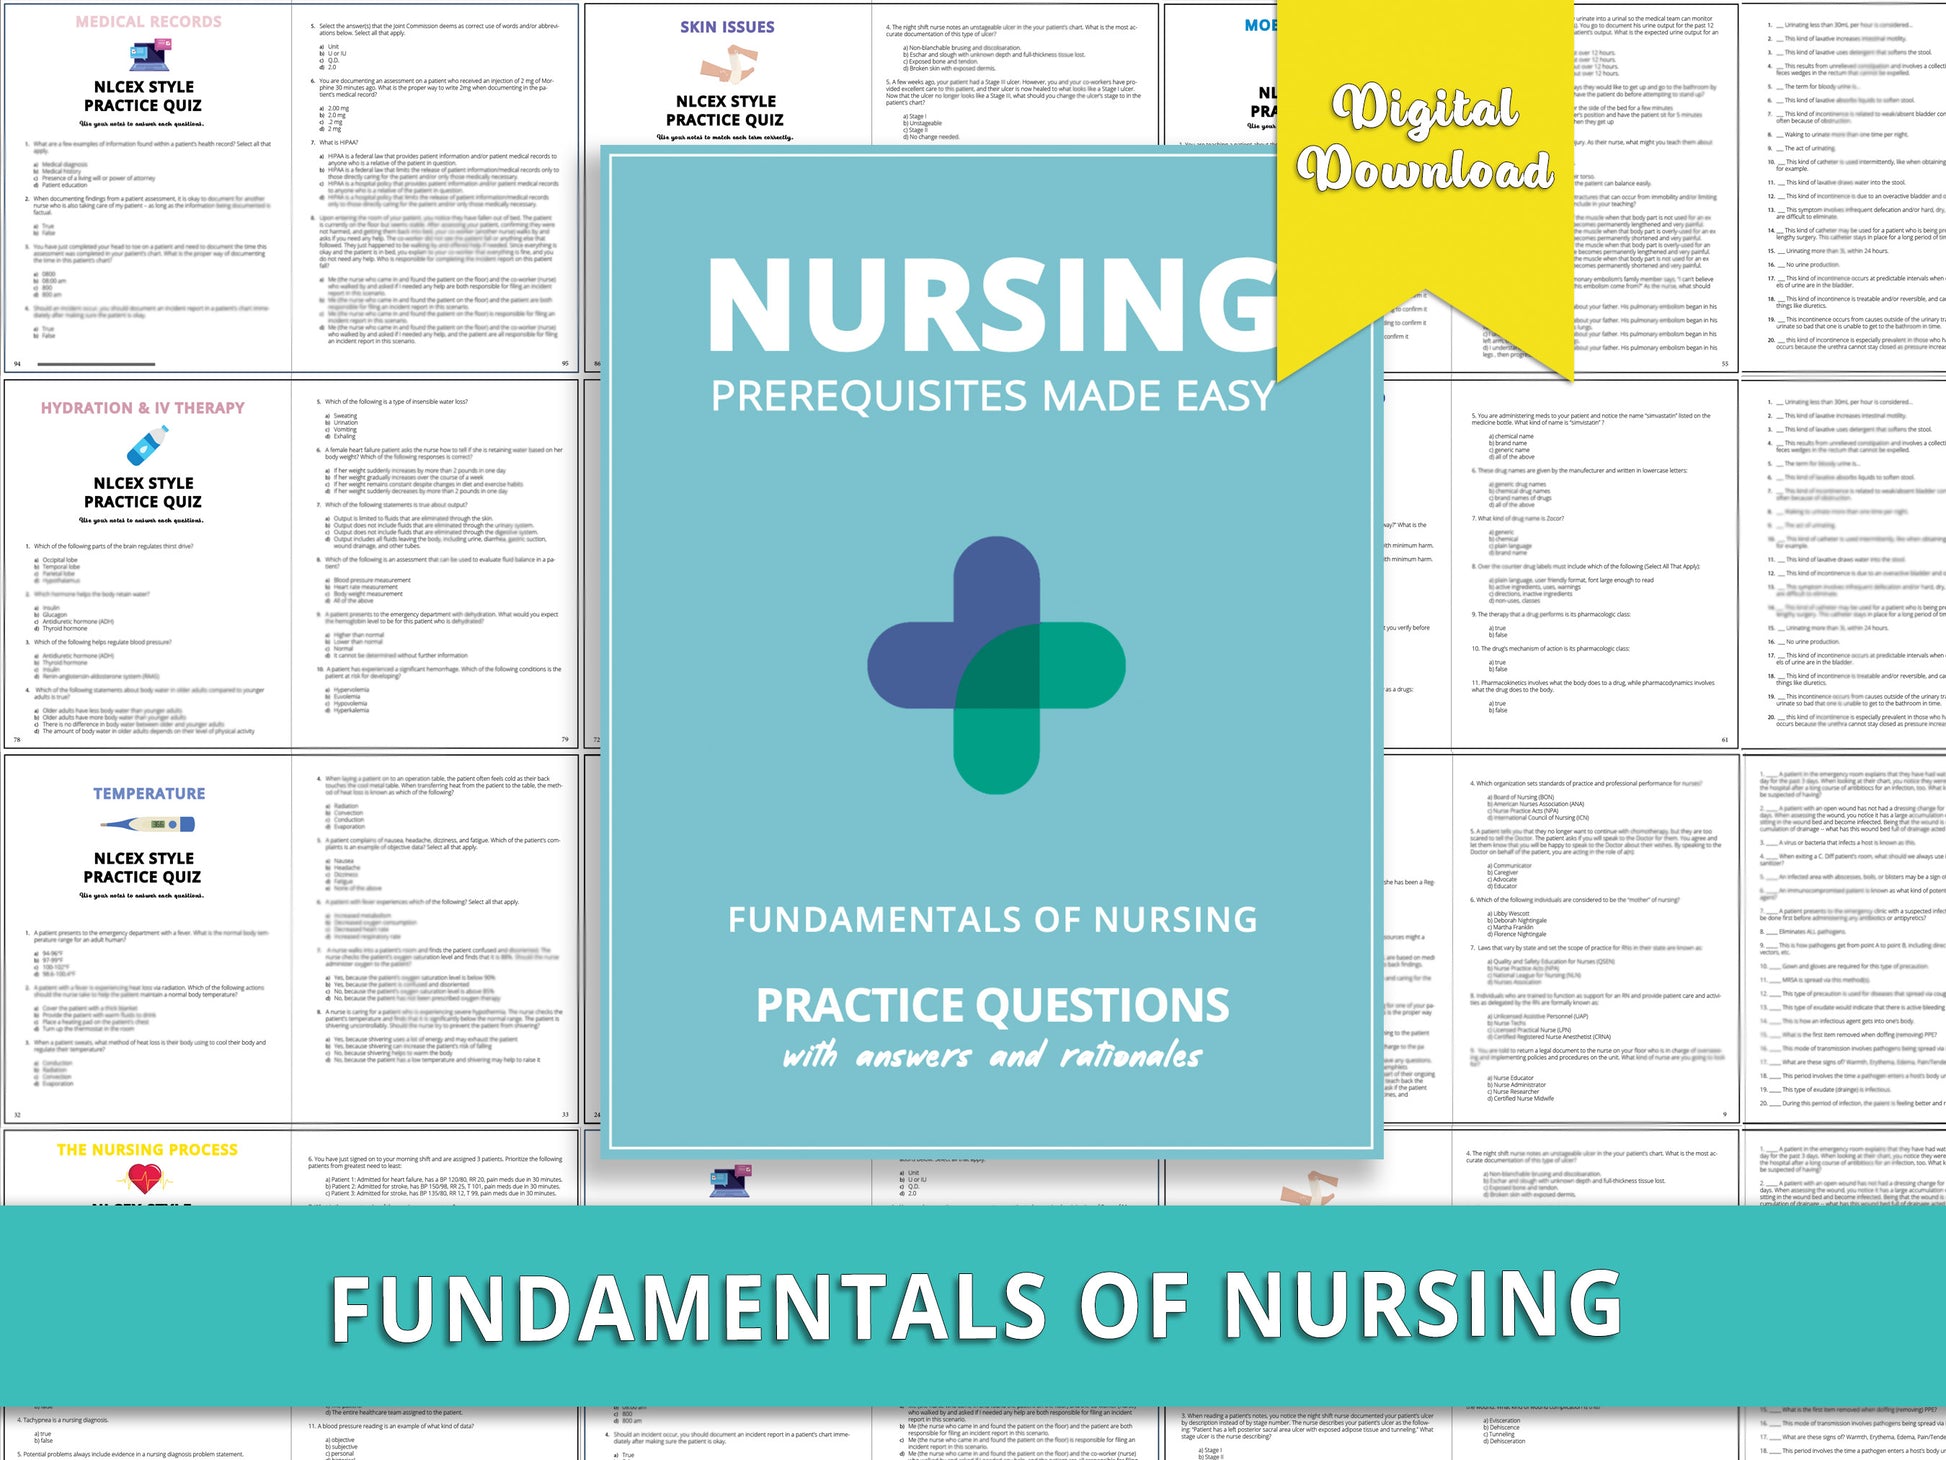 Fundamentals of Nursing book displayed on top of examples of practice questions from within the book, with 'fundamentals of nursing' at the bottom of the screen. Comprehensive study guide featuring detailed notes, practice questions, and study aids for nursing students.